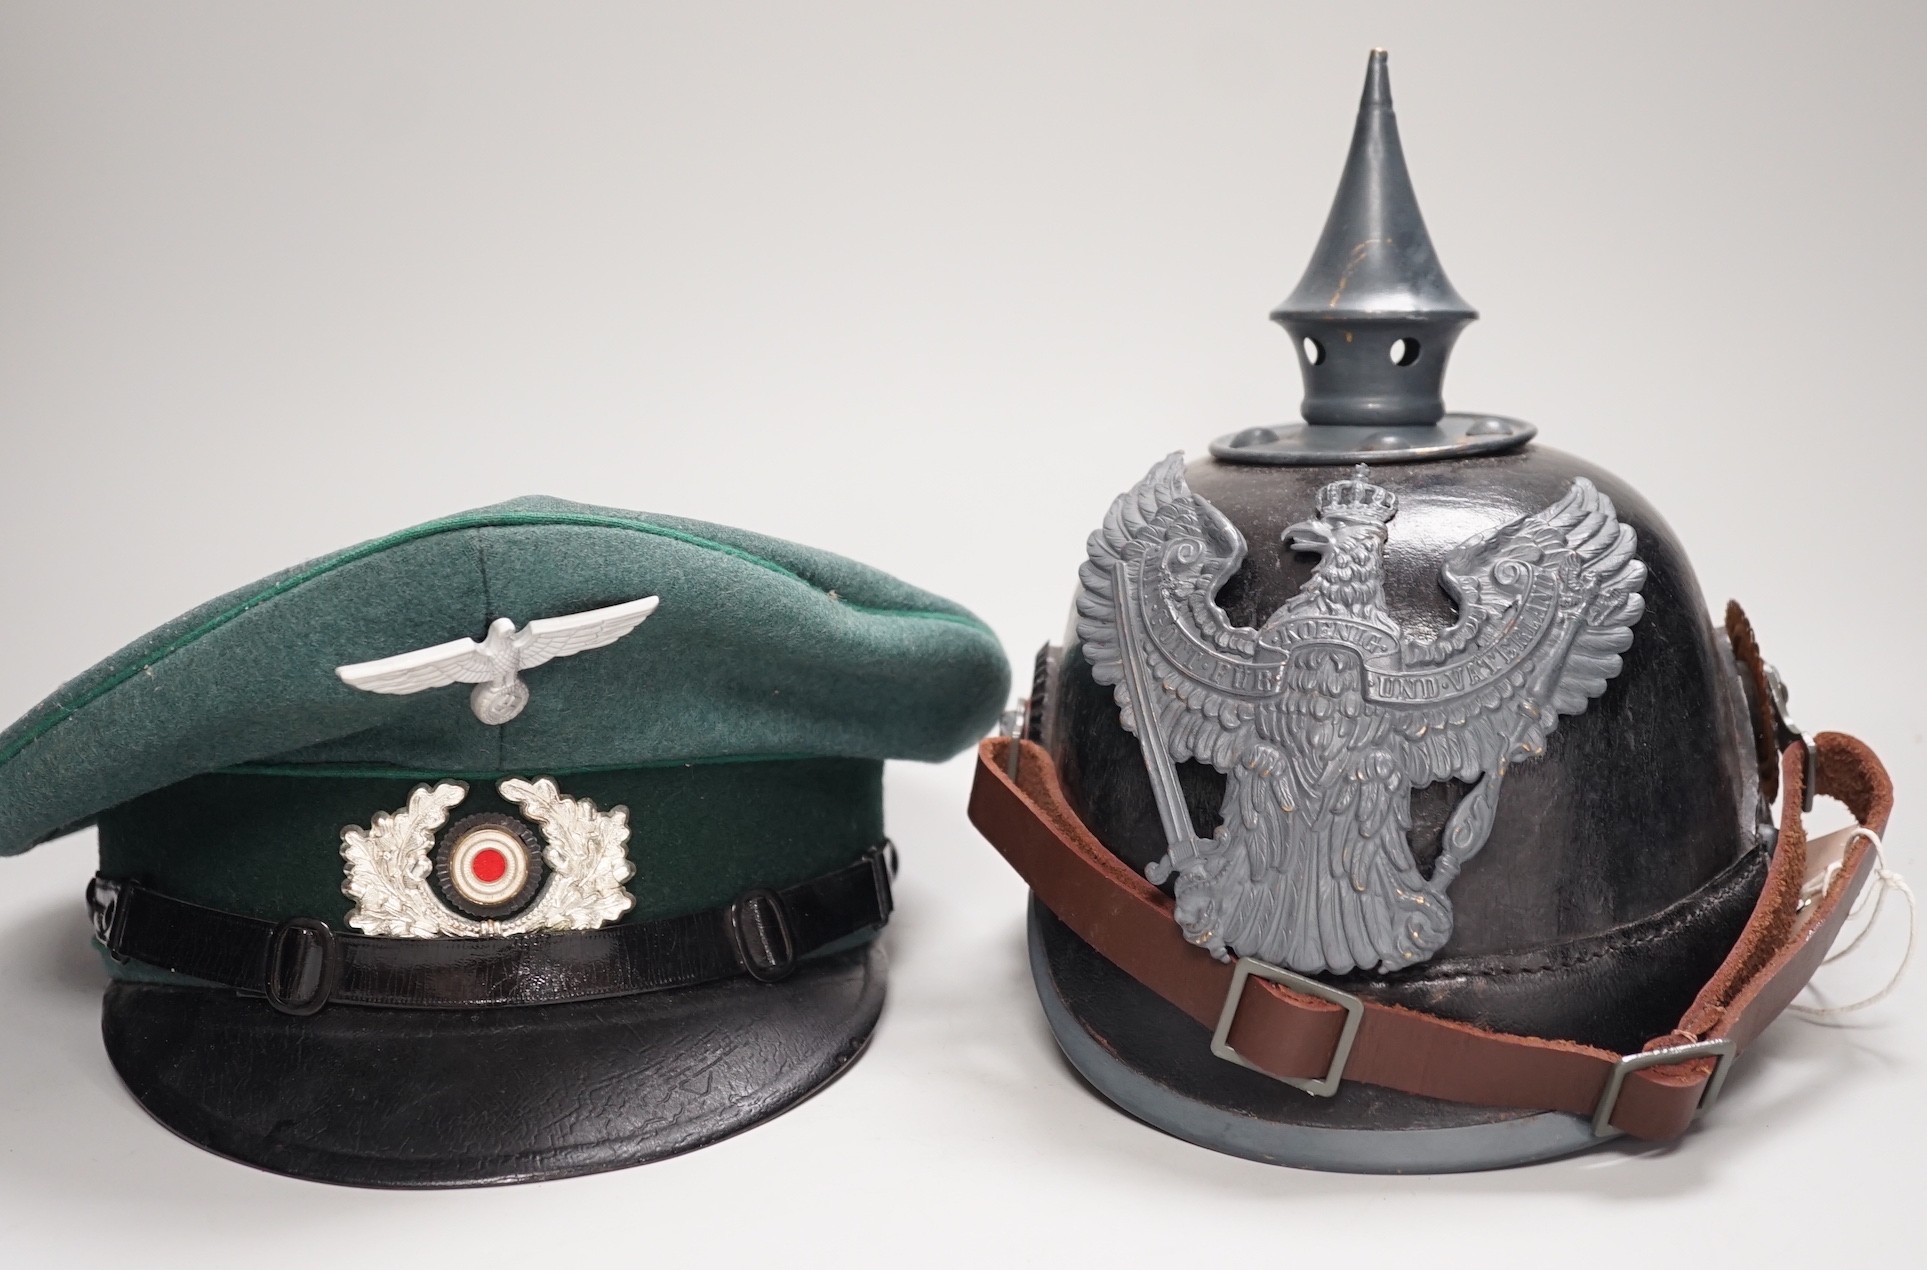 Two German style military hats